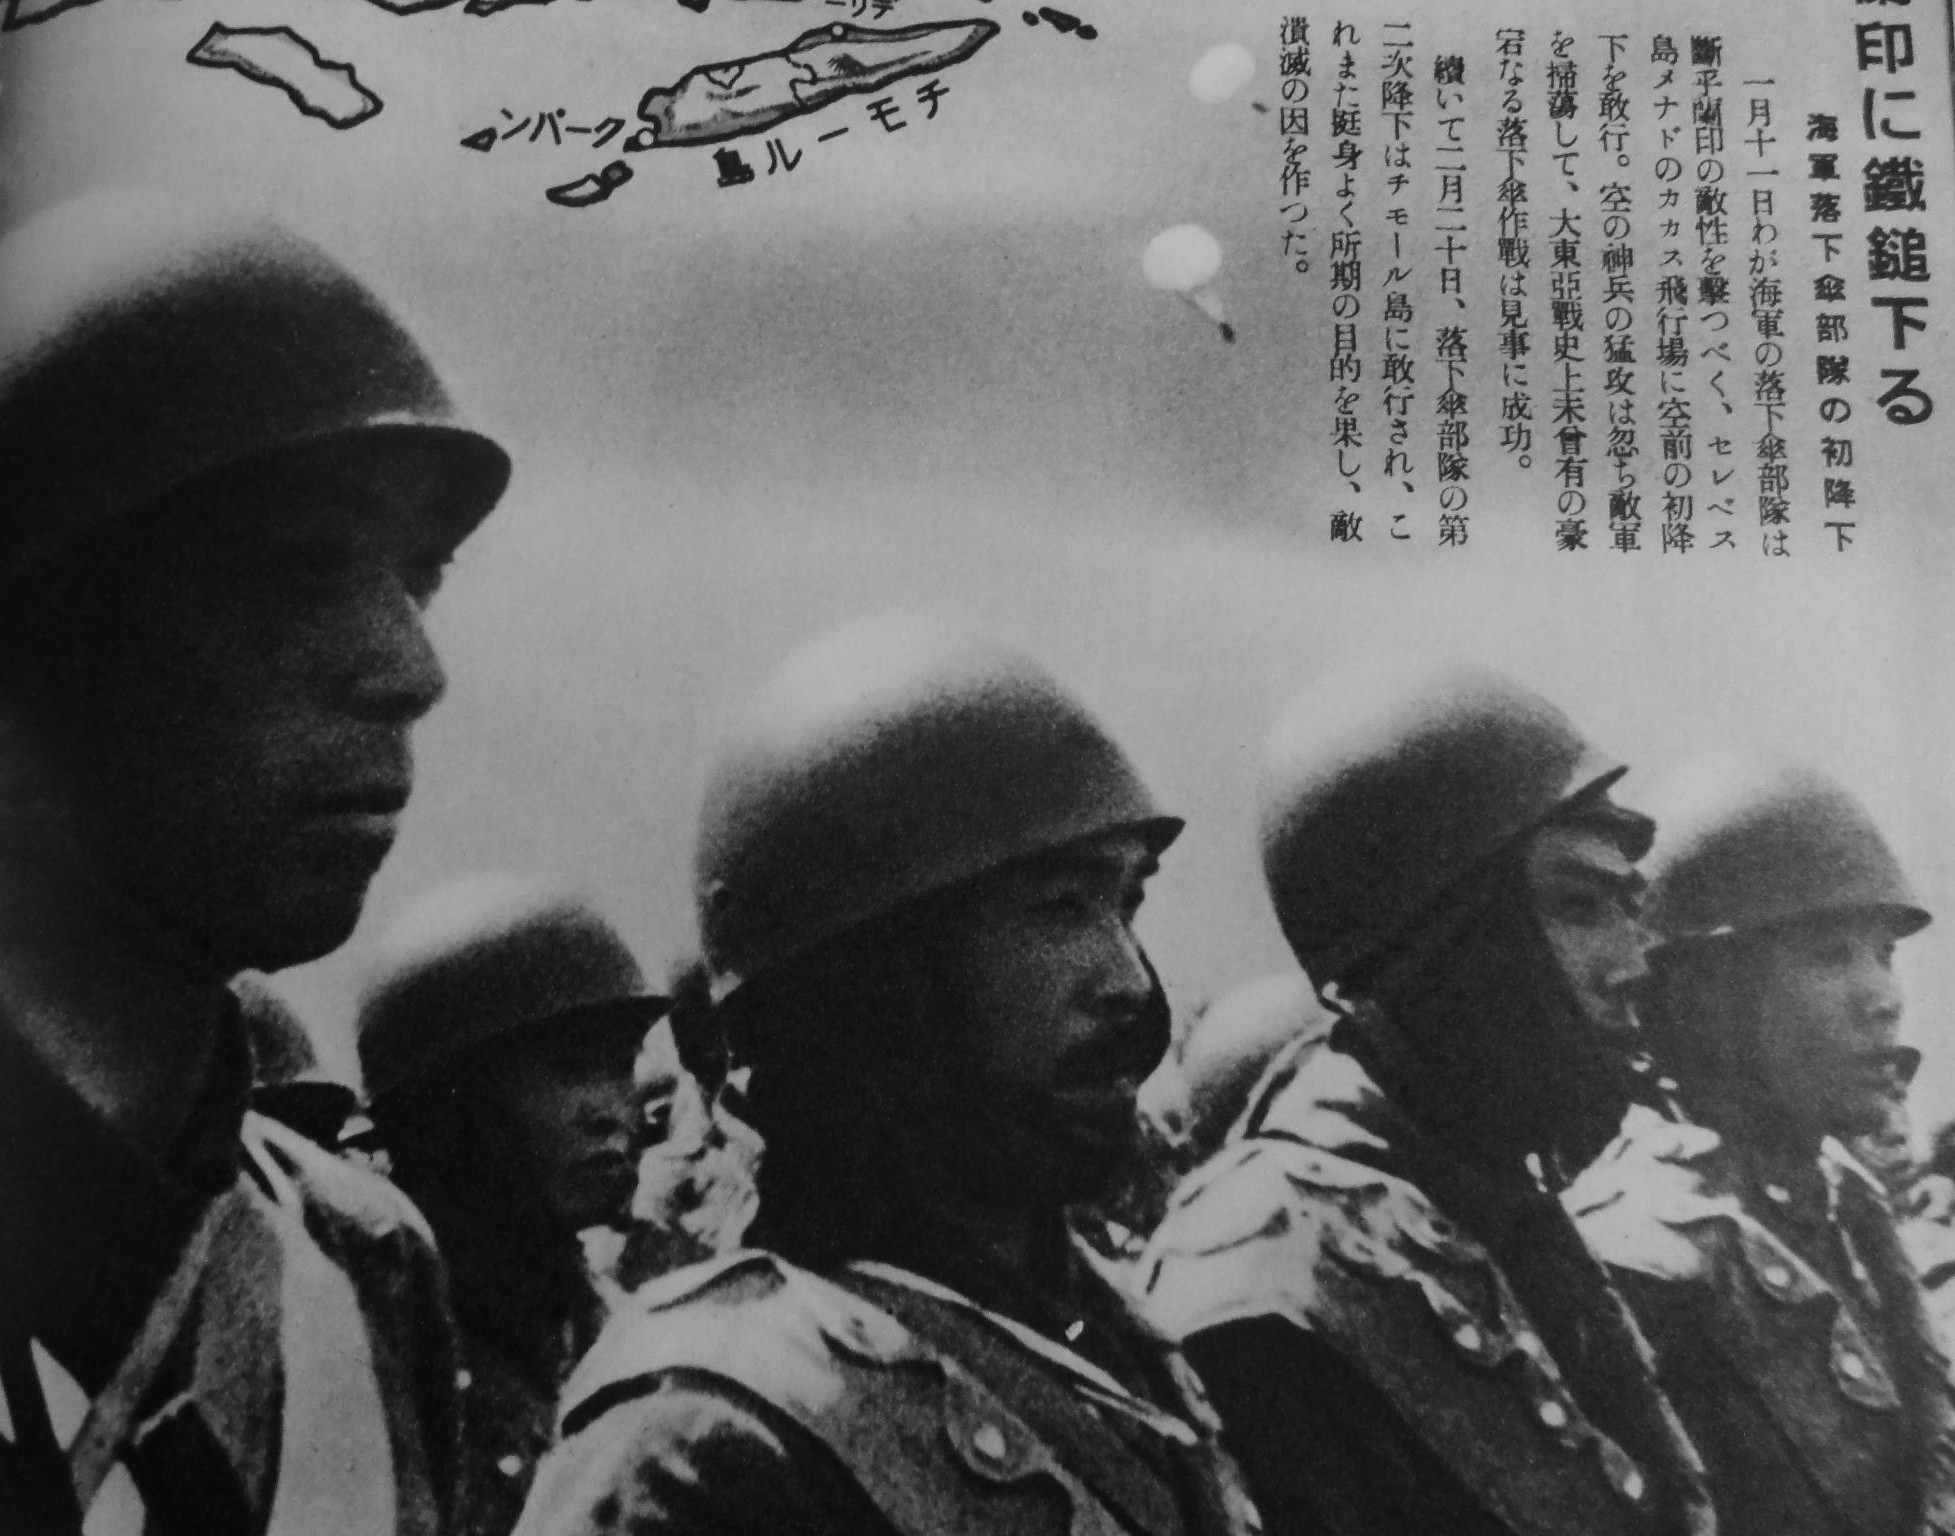 Japanese paratroopers, possibly preparing for the invasion of southern Sumatra, Dutch East Indies, Feb 1942